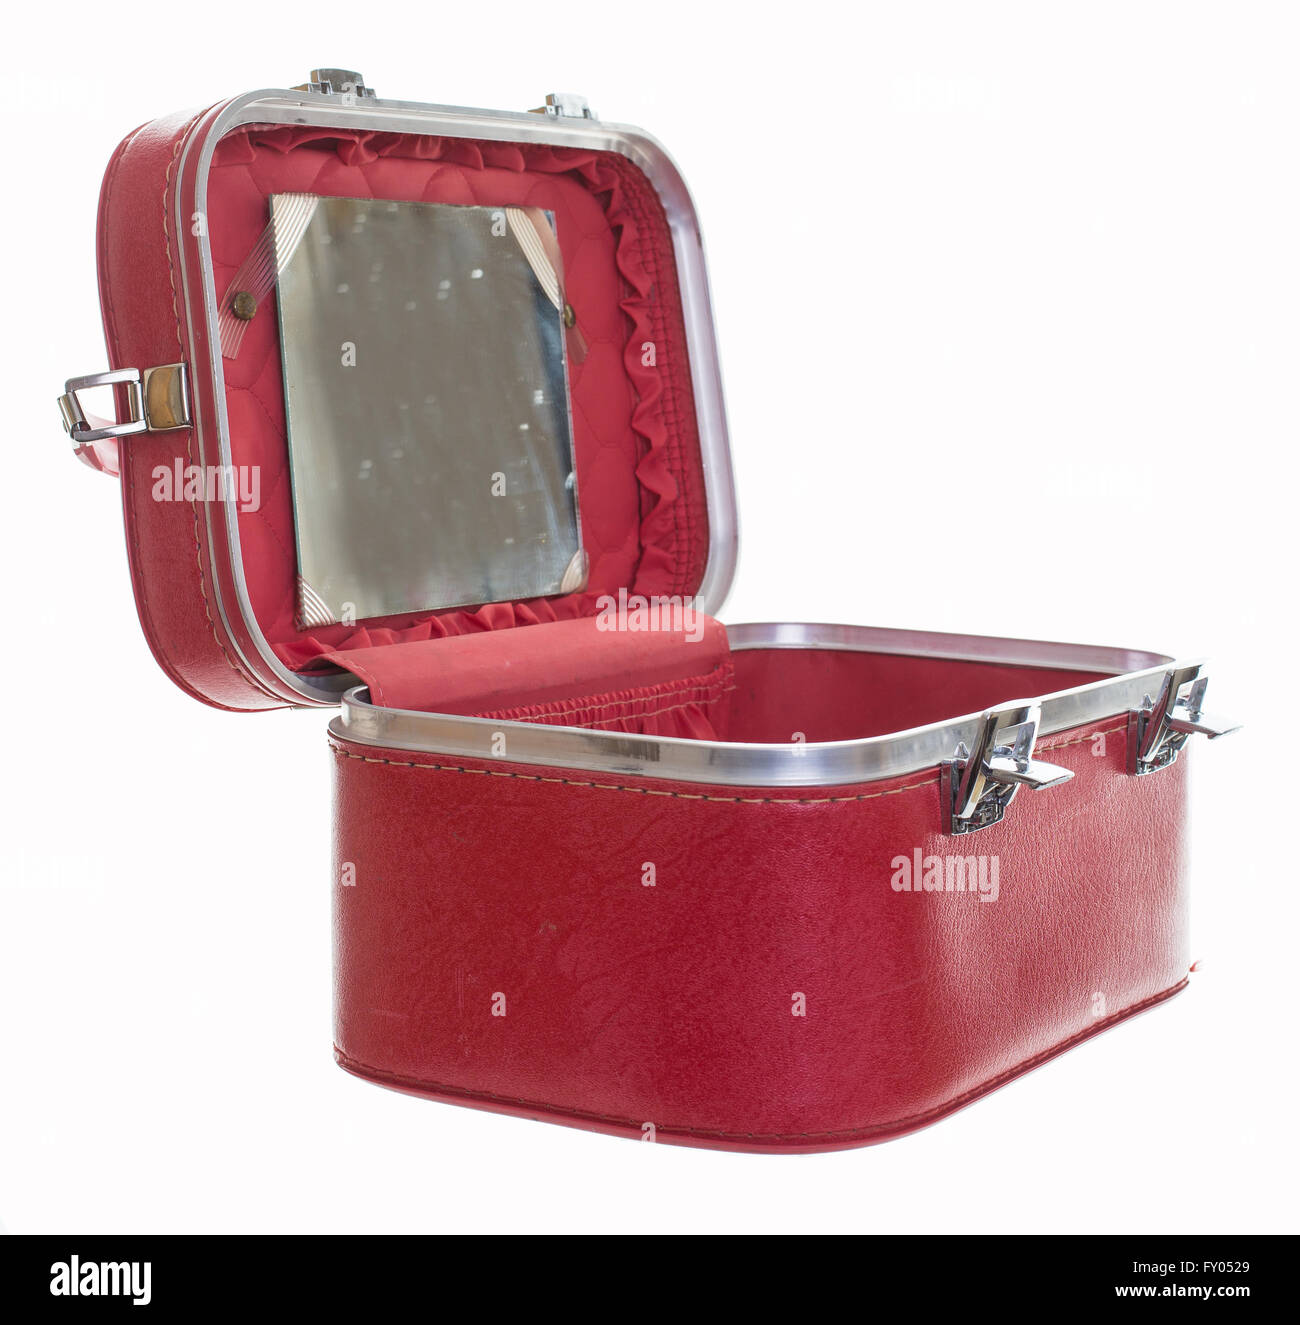 An old vintage red train case or makeup luggage isolated over white background Stock Photo